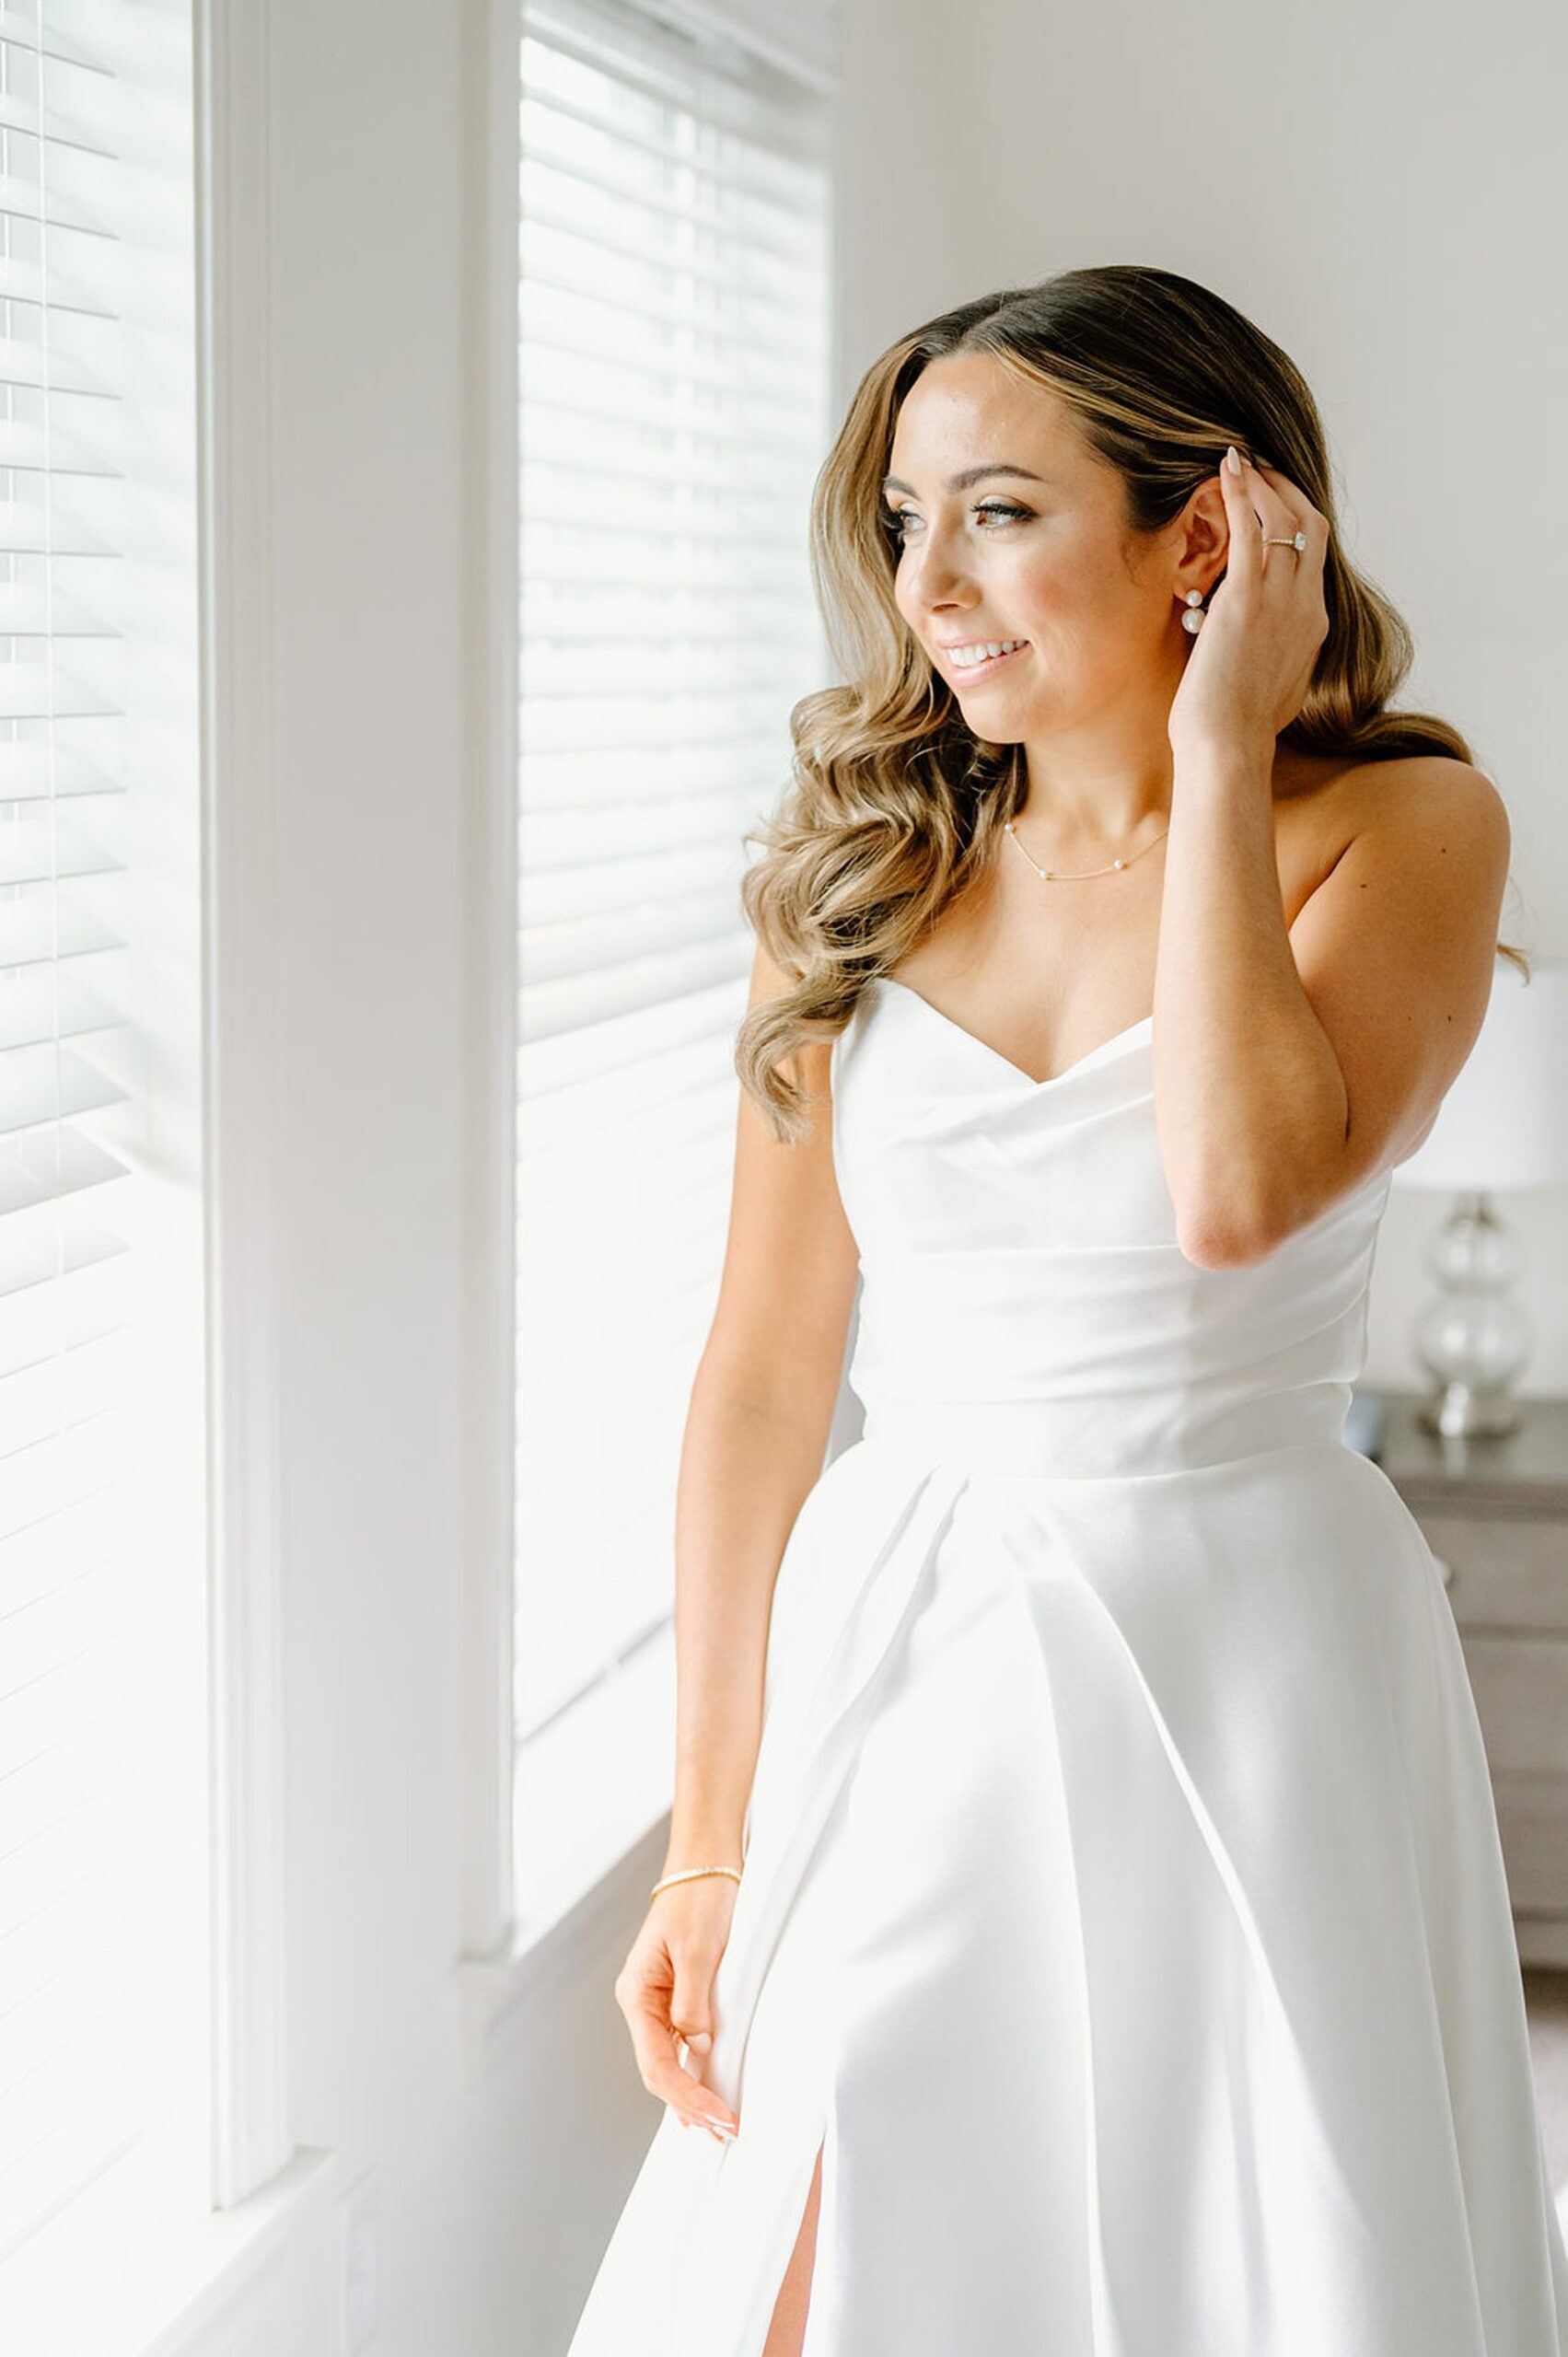 Tips for wedding day getting ready photos